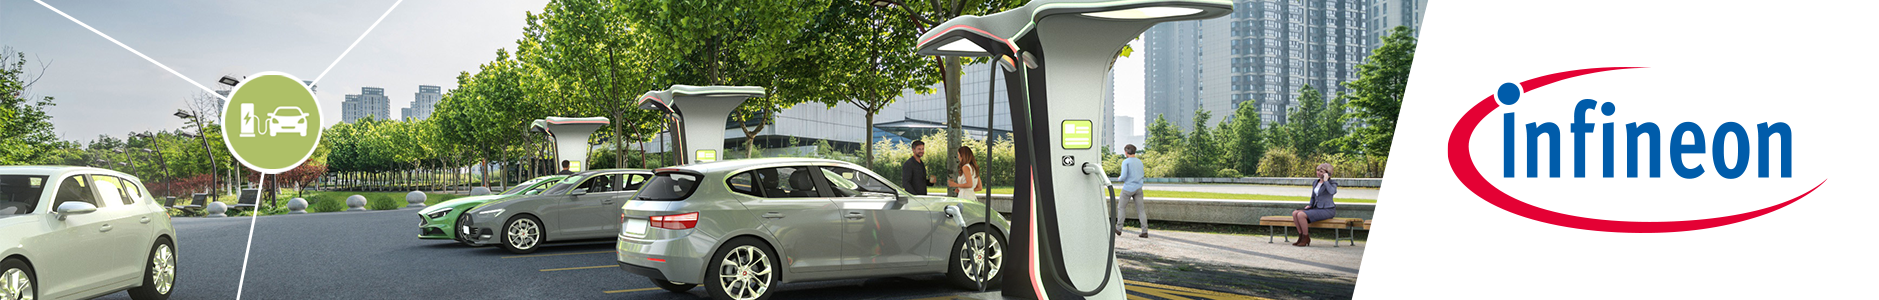 High-power solutions for fast EV charging from Infineon